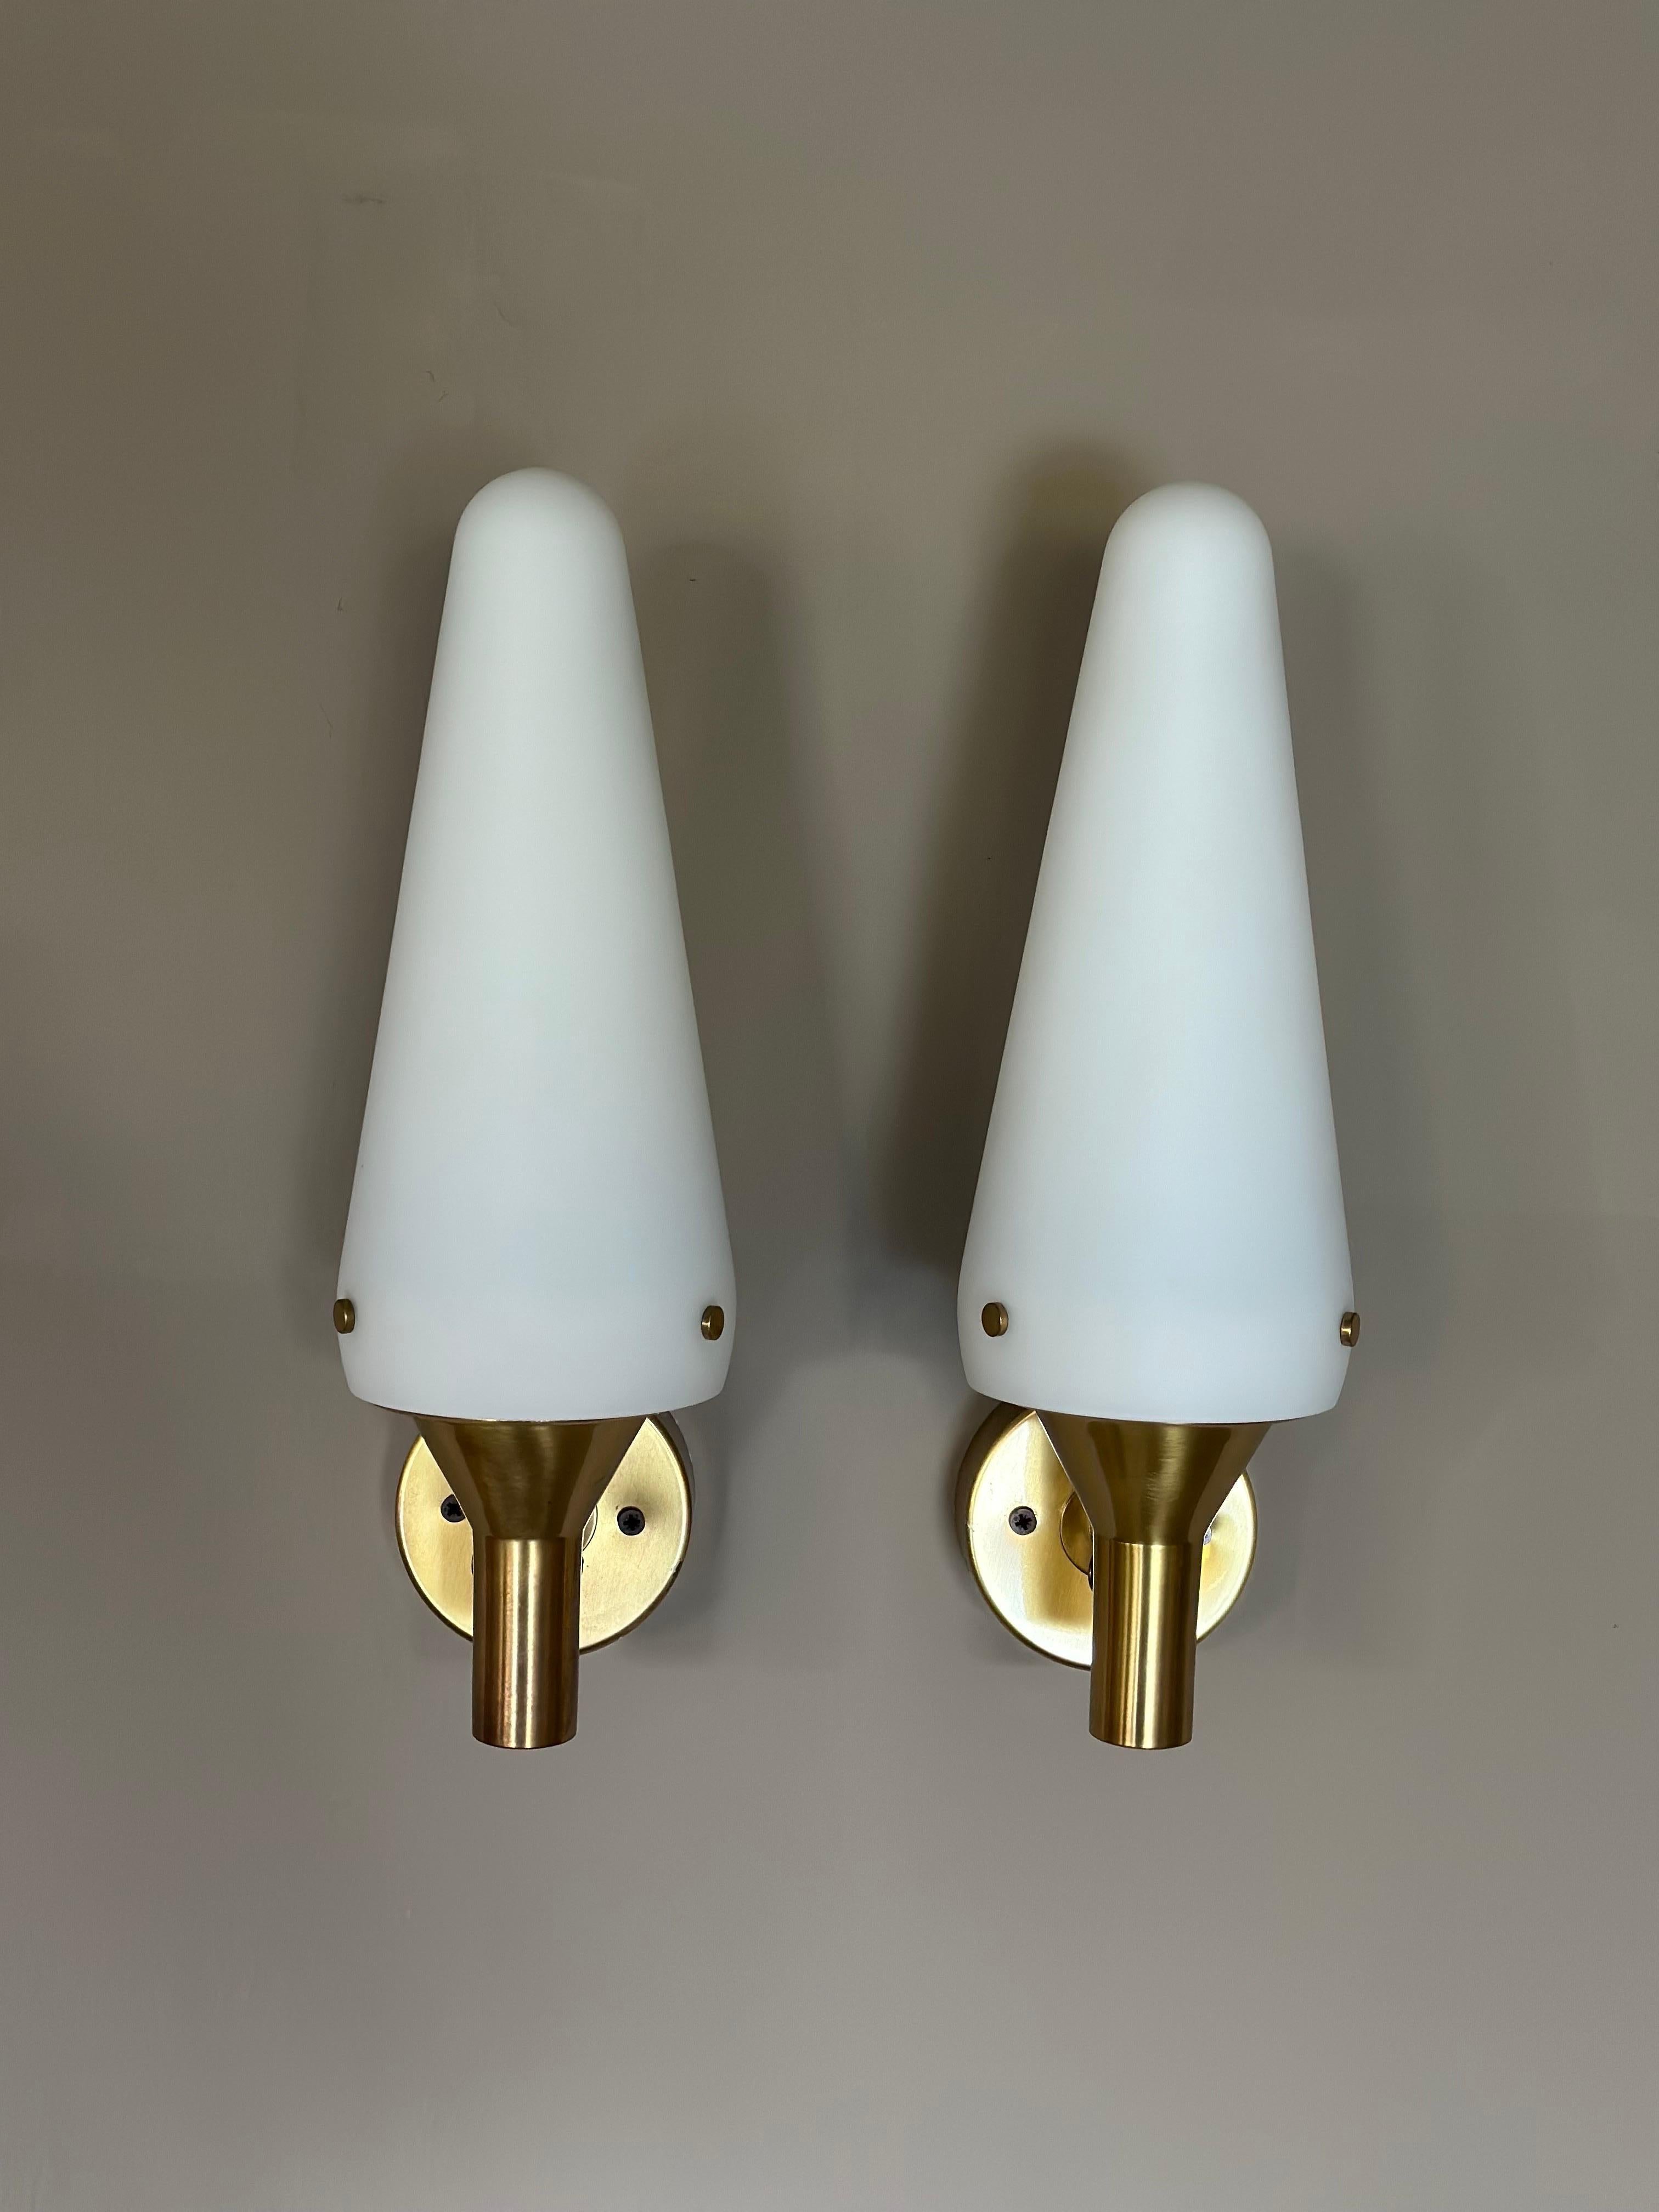 Authentic 1670 Hans-Agne Jakobsson Wall Lamps - Exquisite Brass and Opaline Glass Pair (1950s)

Introducing a remarkable pair of 1670 Hans-Agne Jakobsson Wall Lamps, meticulously crafted in the charming town of Markaryd, Sweden during the vibrant